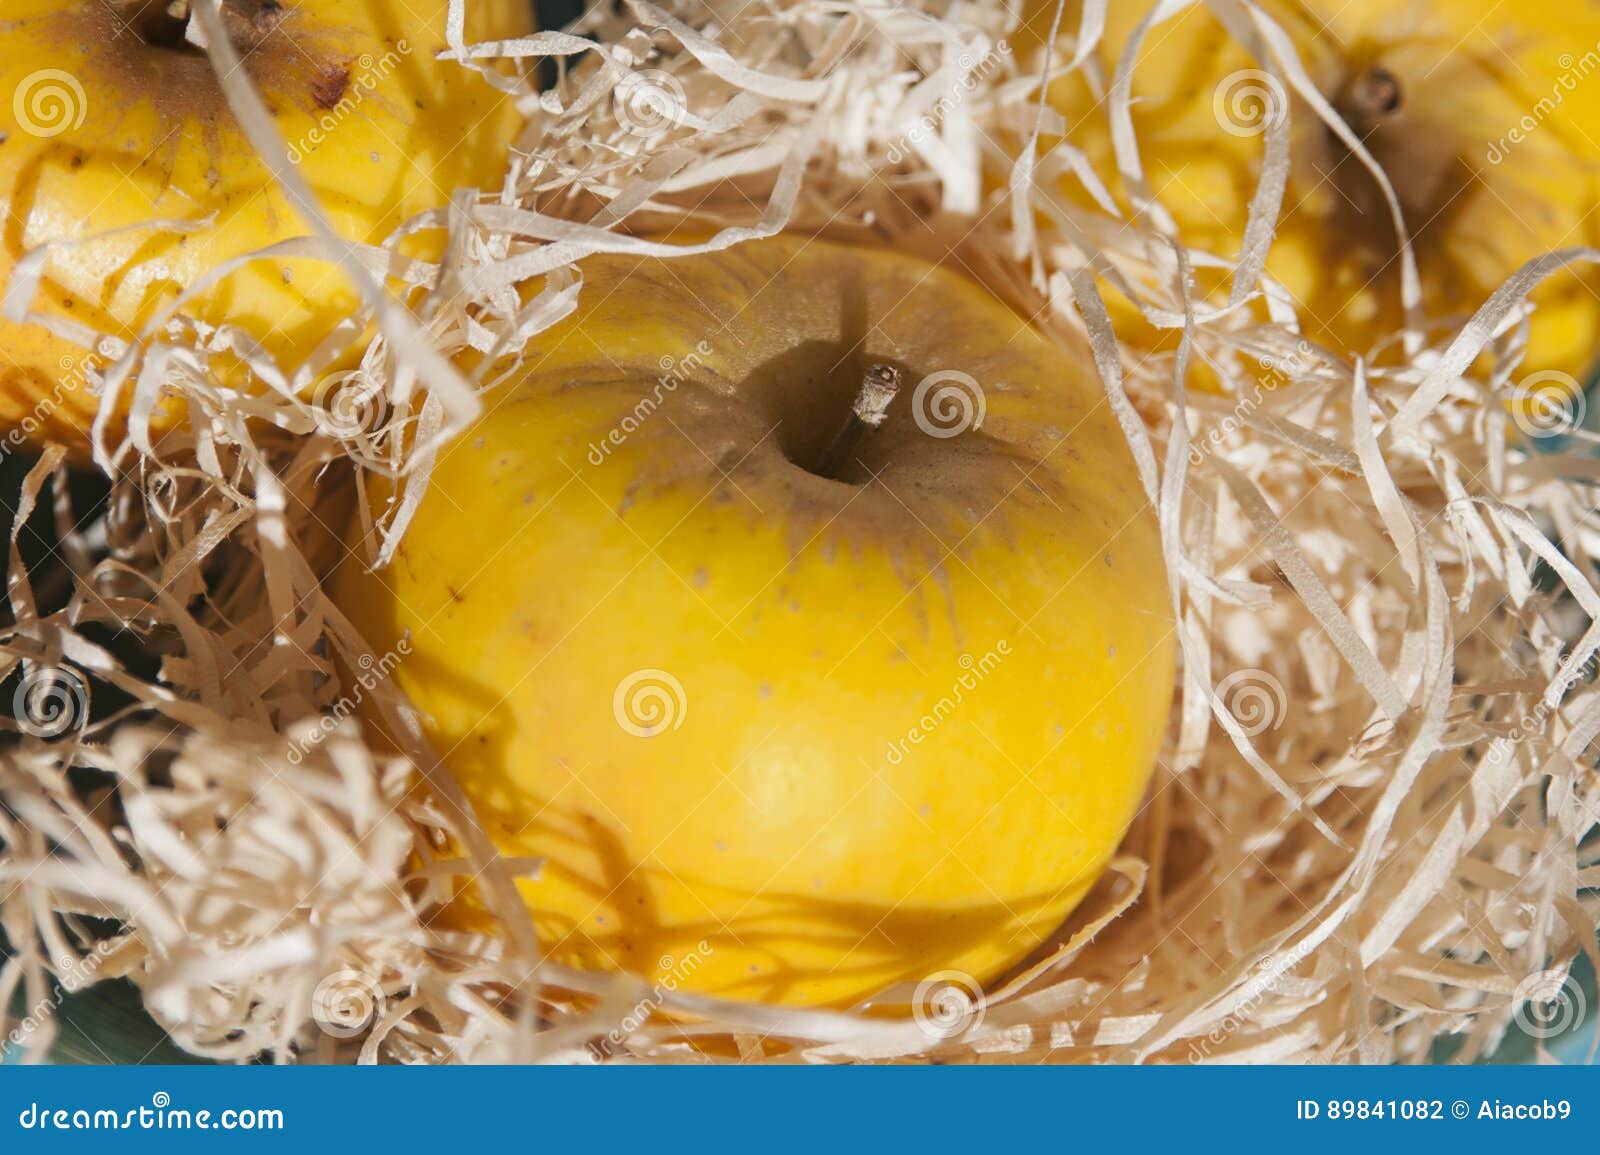 https://thumbs.dreamstime.com/z/non-browning-opal-variety-apples-horizontal-shot-tasty-positioned-sunlight-wrapped-wood-wool-protection-89841082.jpg